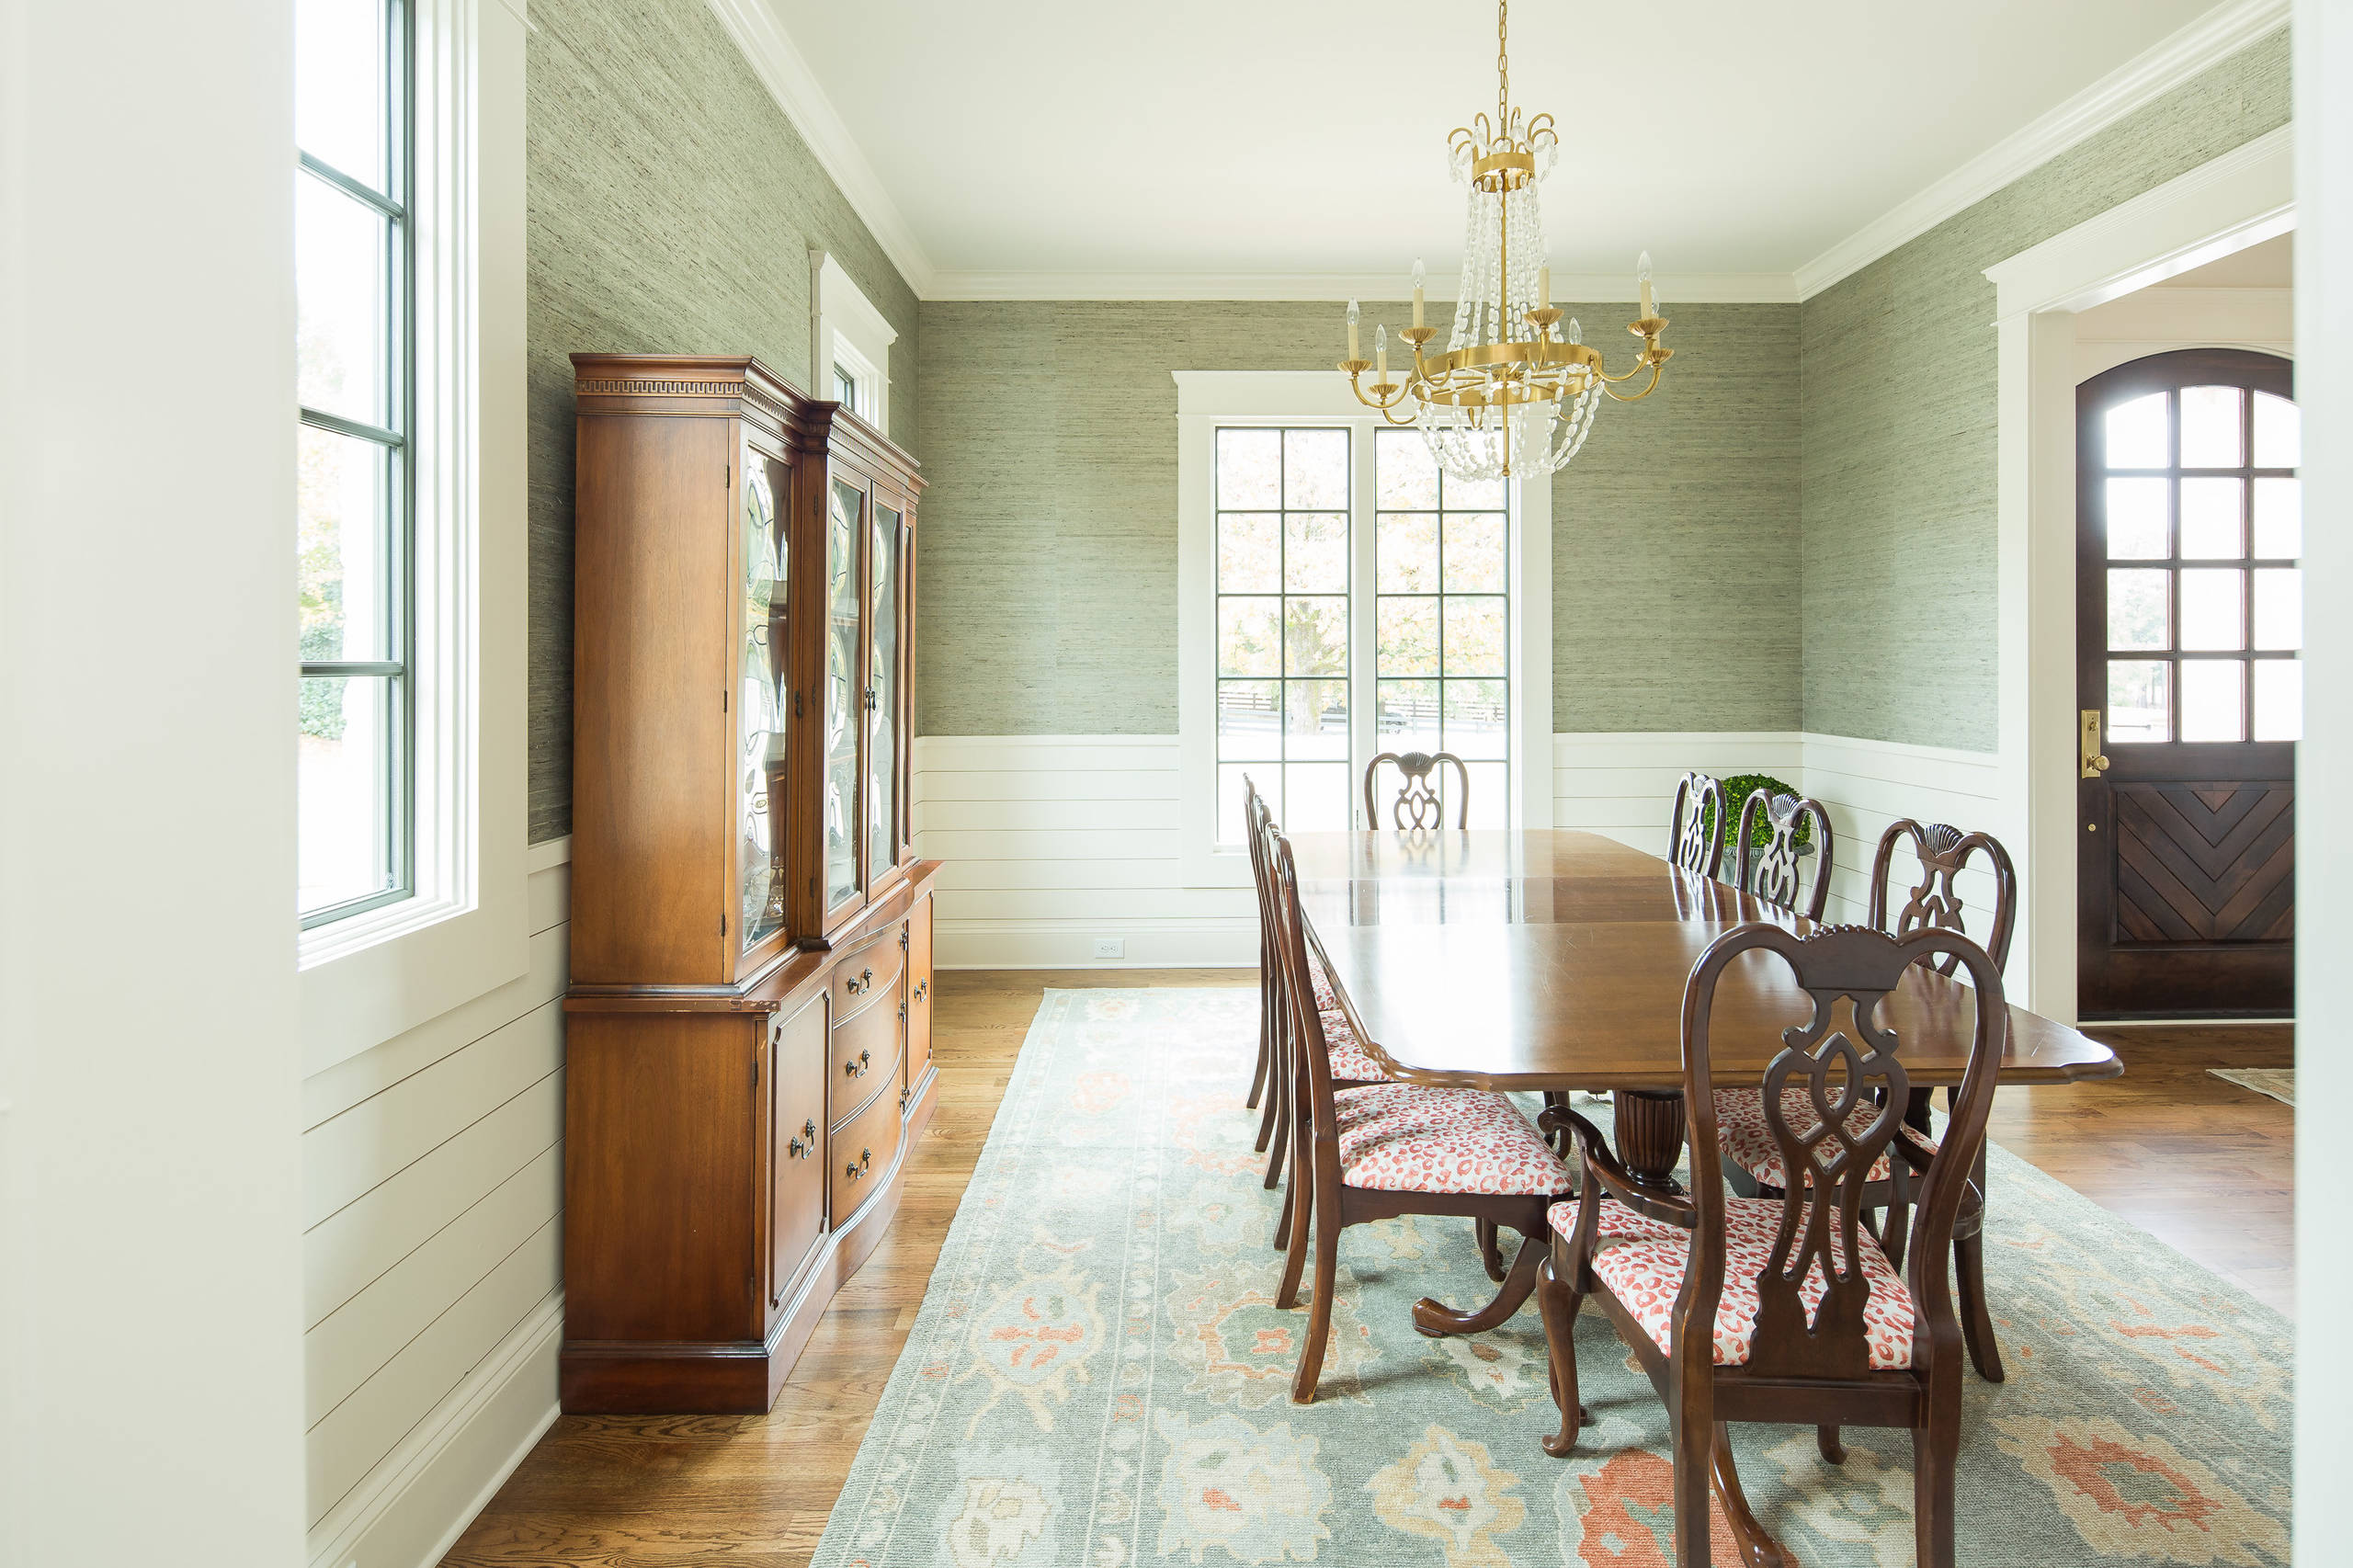 75 Farmhouse Dining Room with Green Walls Ideas You'll Love - June, 2022 |  Houzz